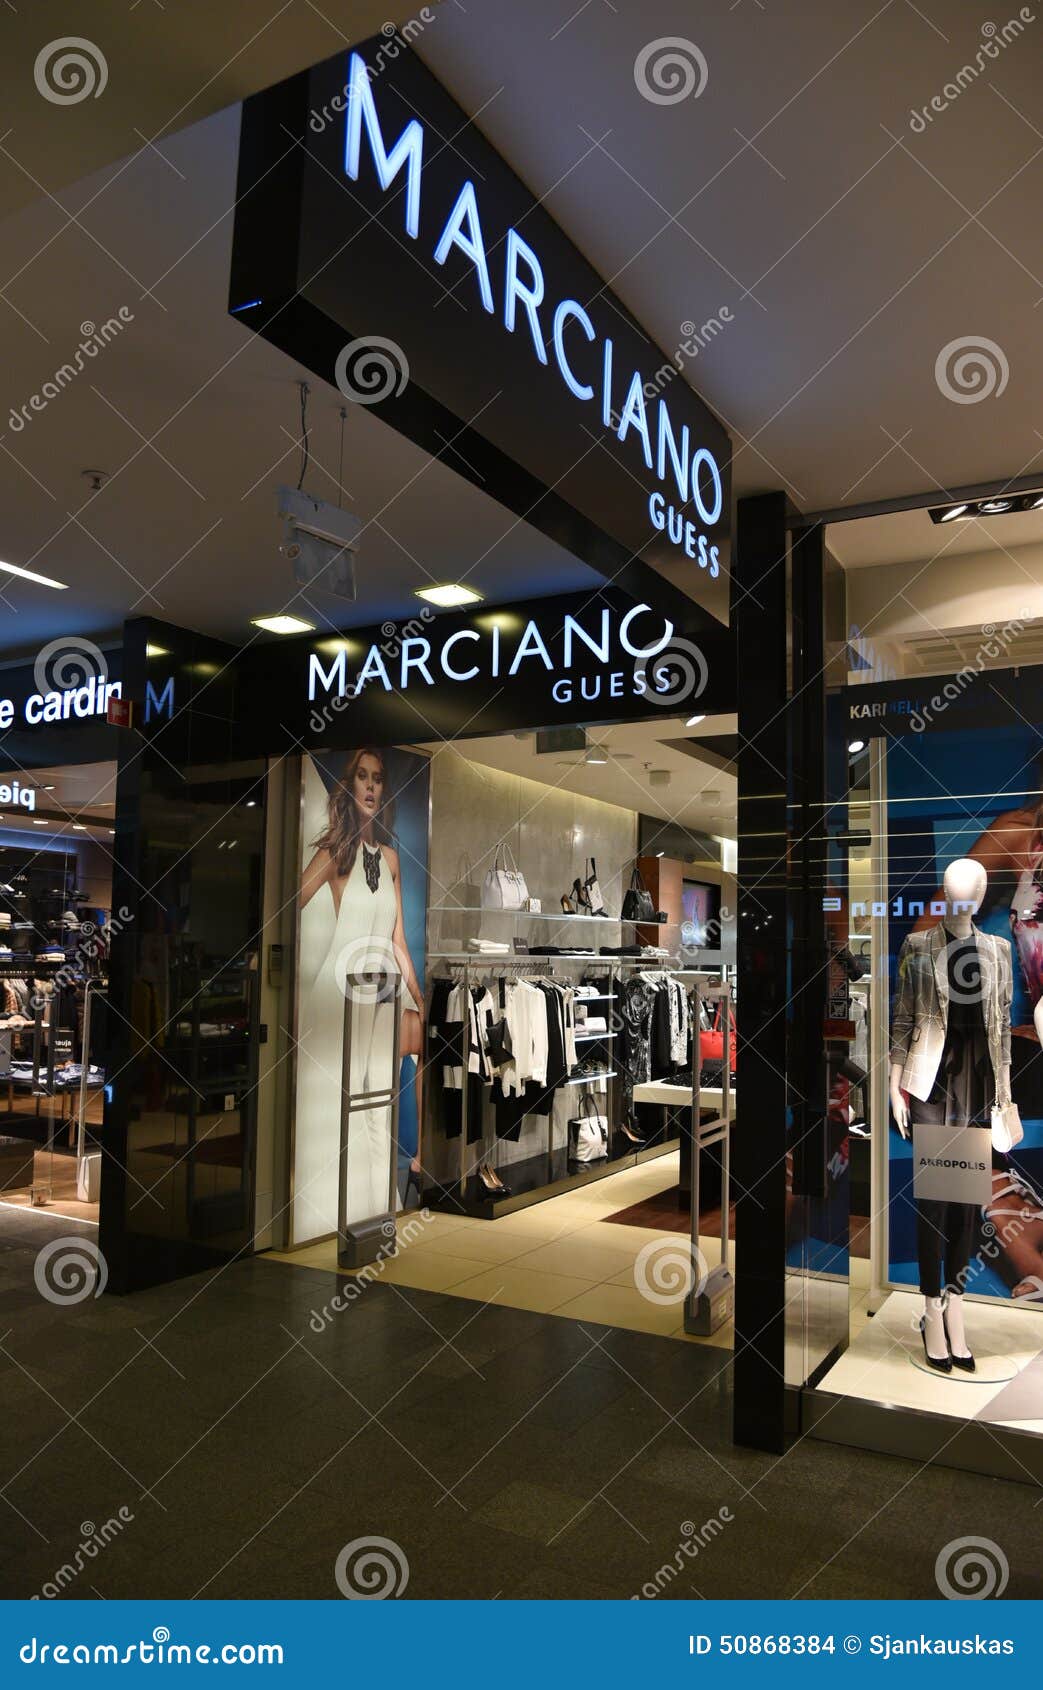 Marciano Guess brand store editorial stock image. Image of clothes